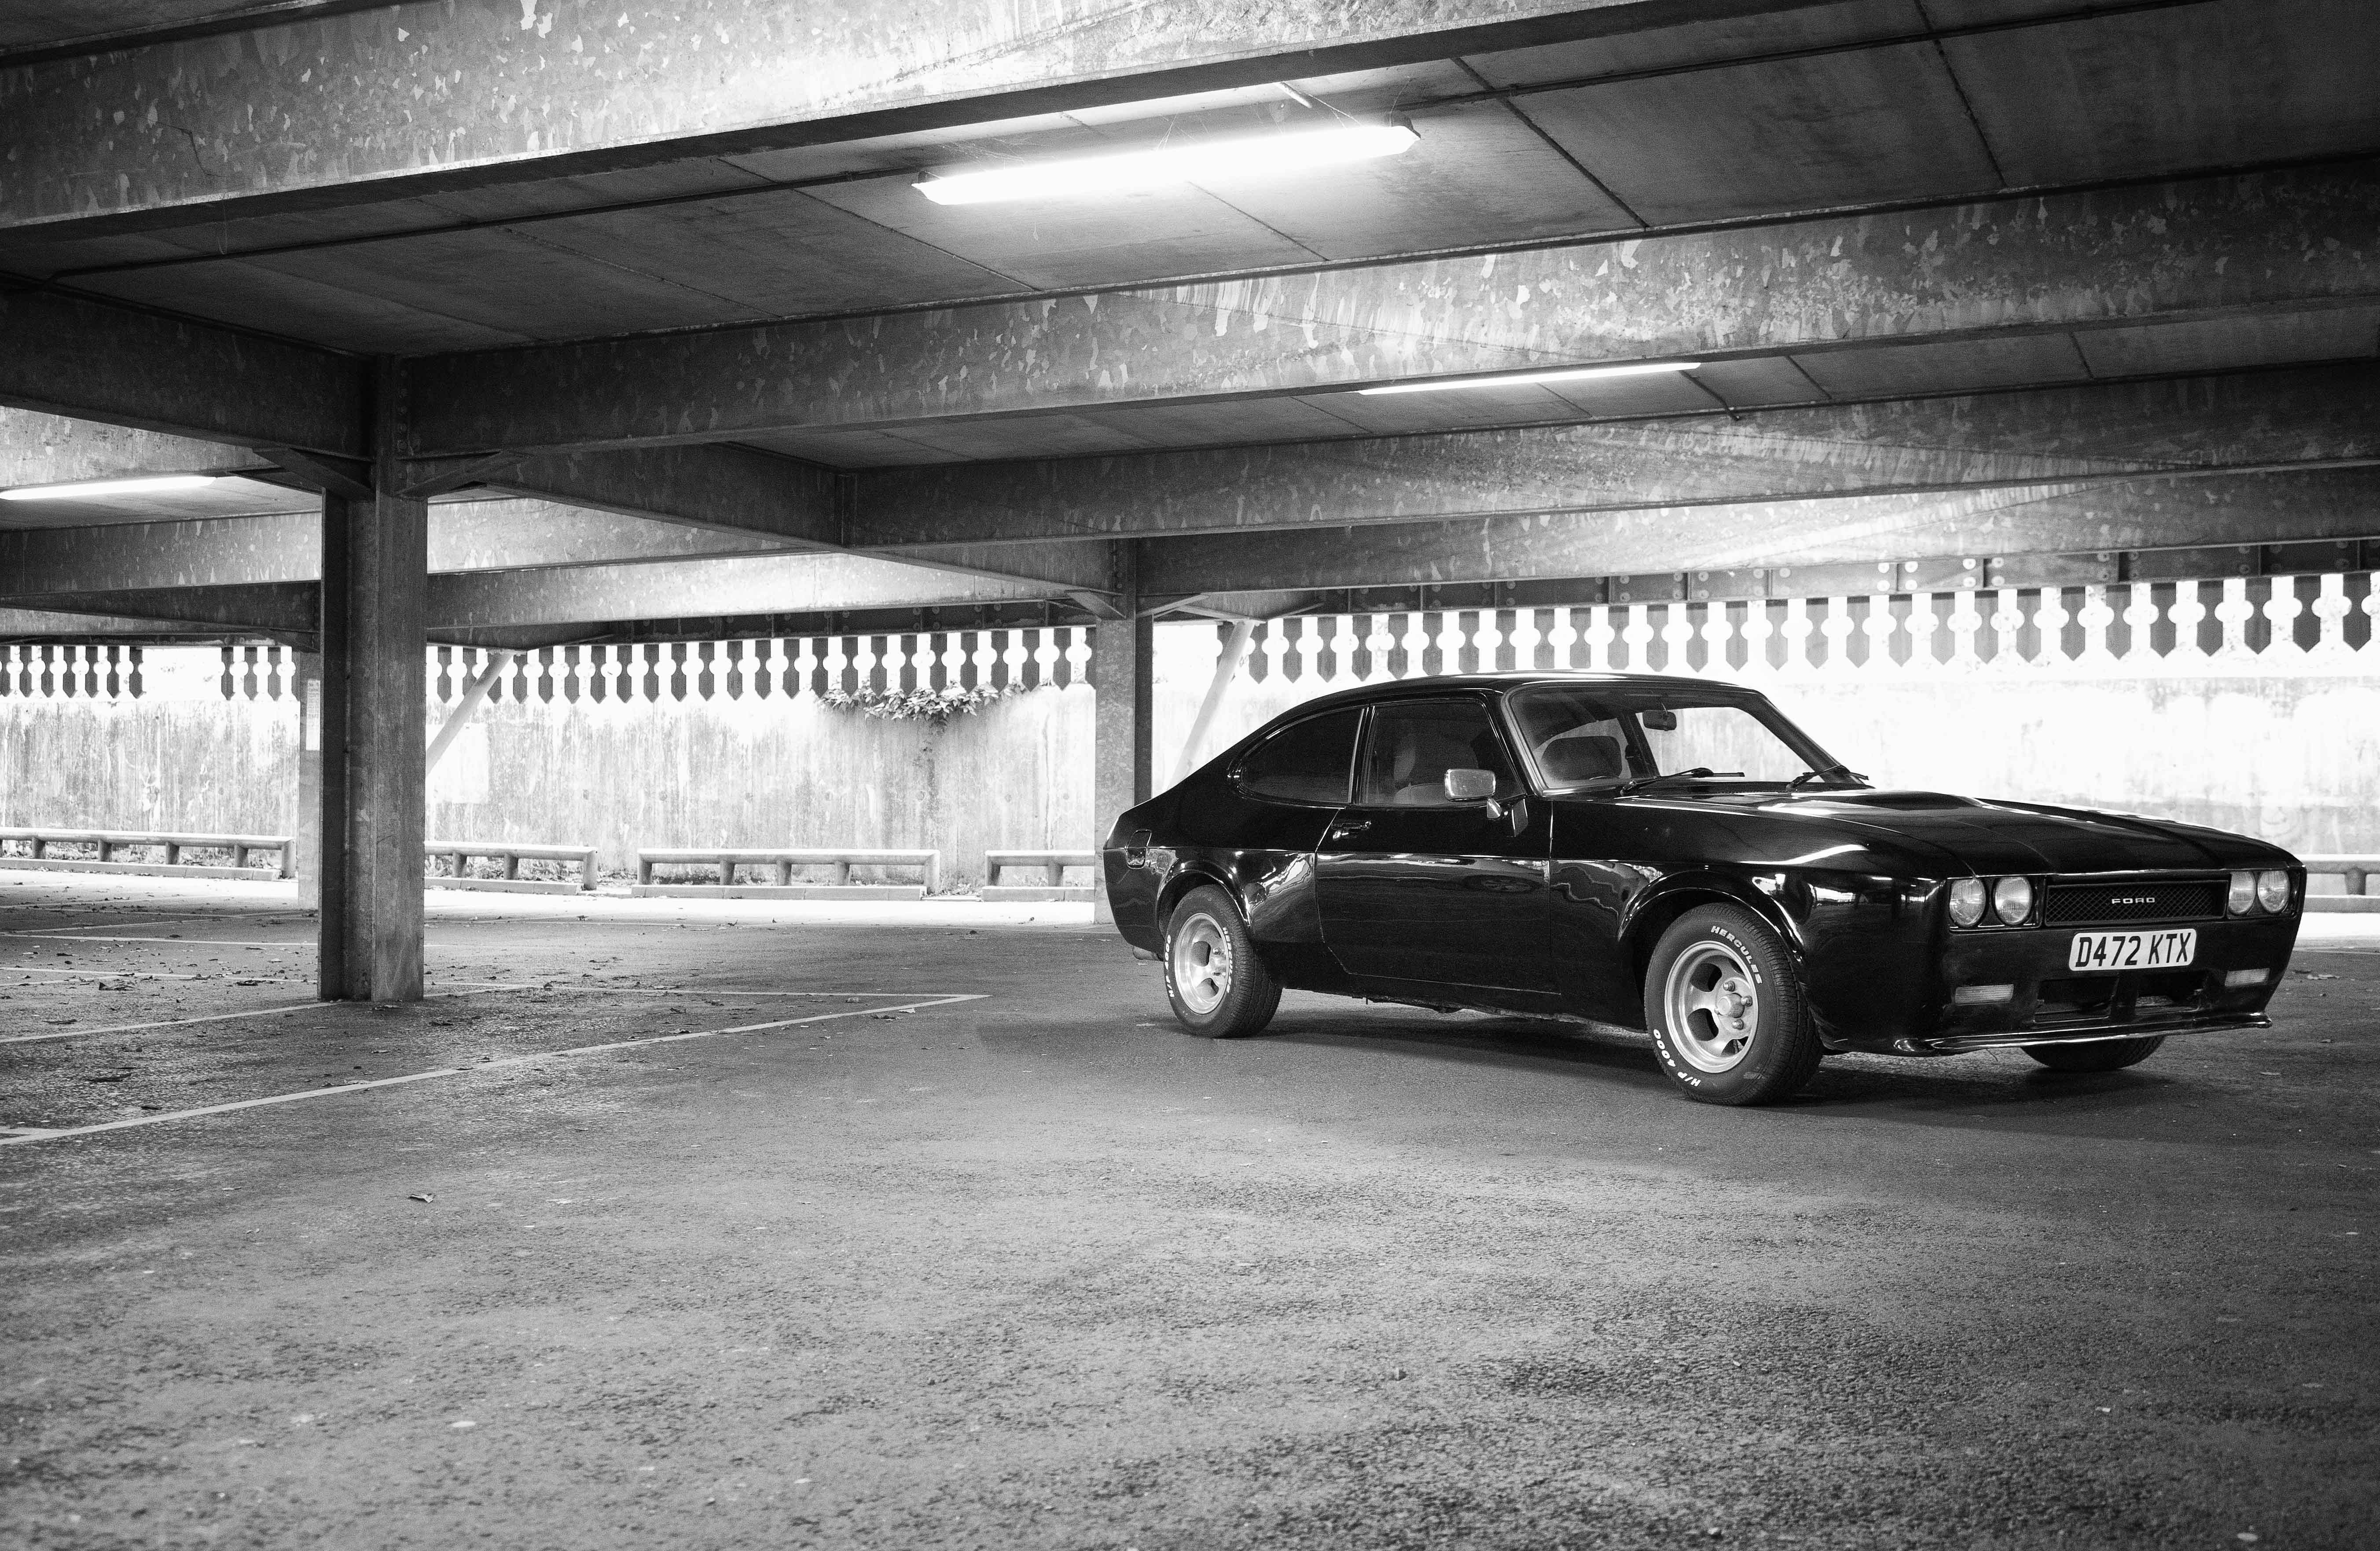 General 5408x3524 car vehicle monochrome numbers black cars Ford British cars